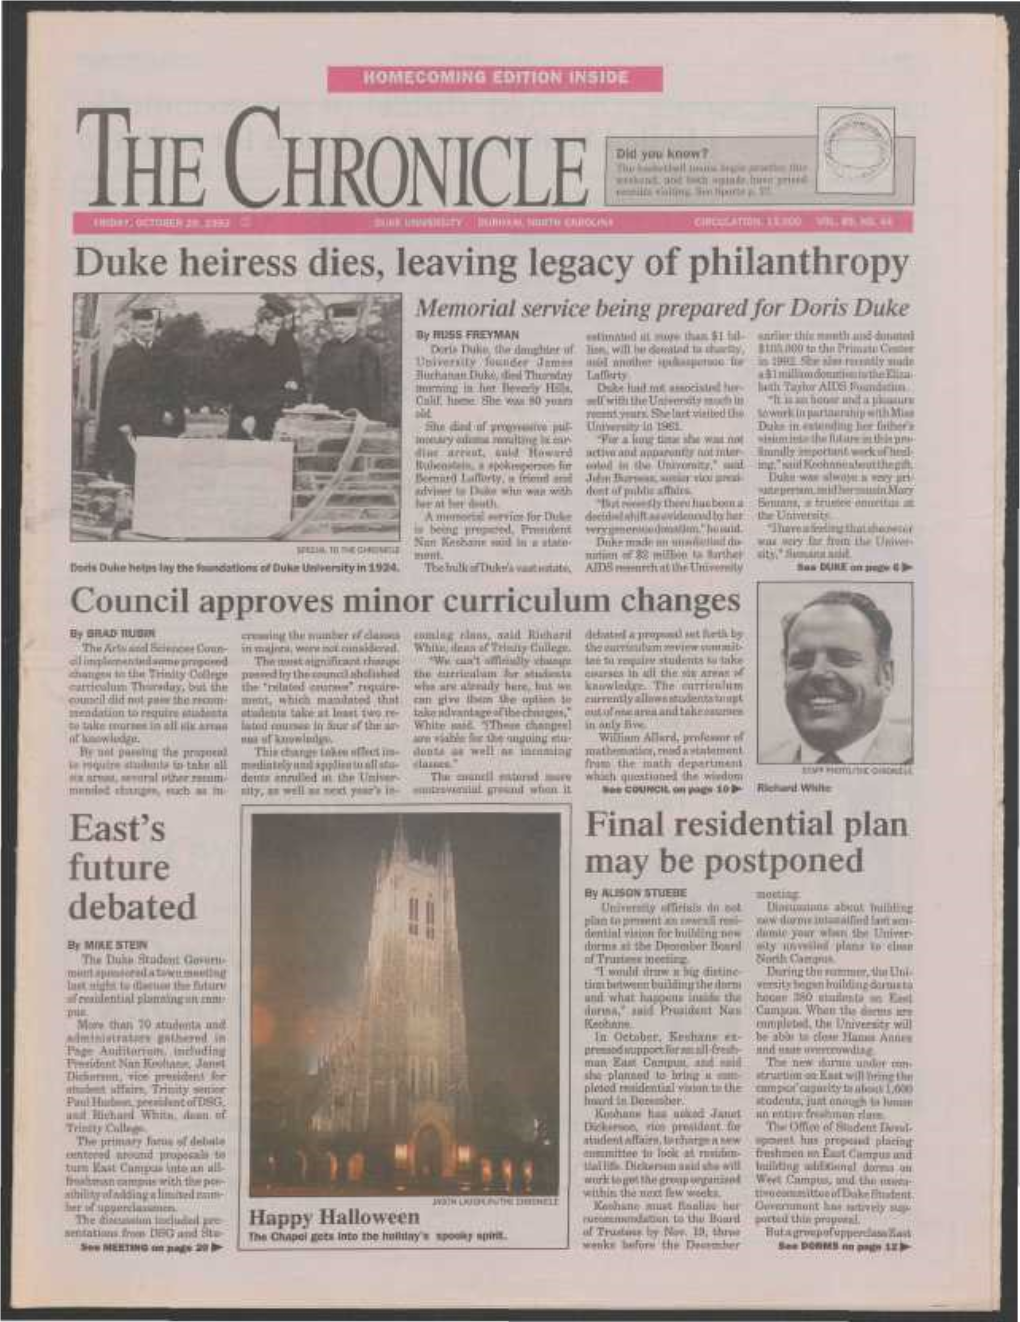 THE CHRONICLE Did You Know?